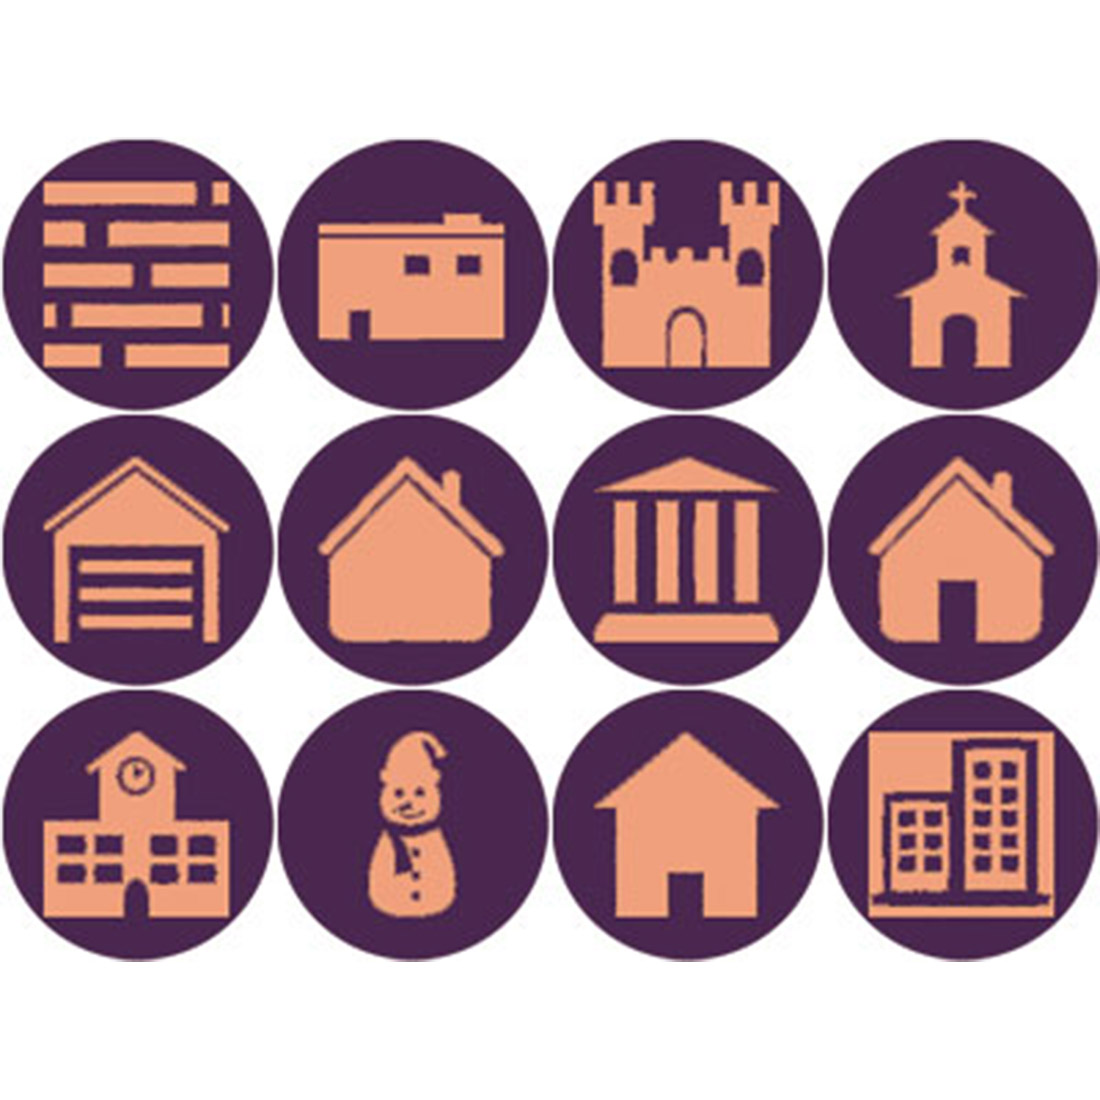 ORANGE AND PURPLE BUILDING ROUND ICONS cover image.